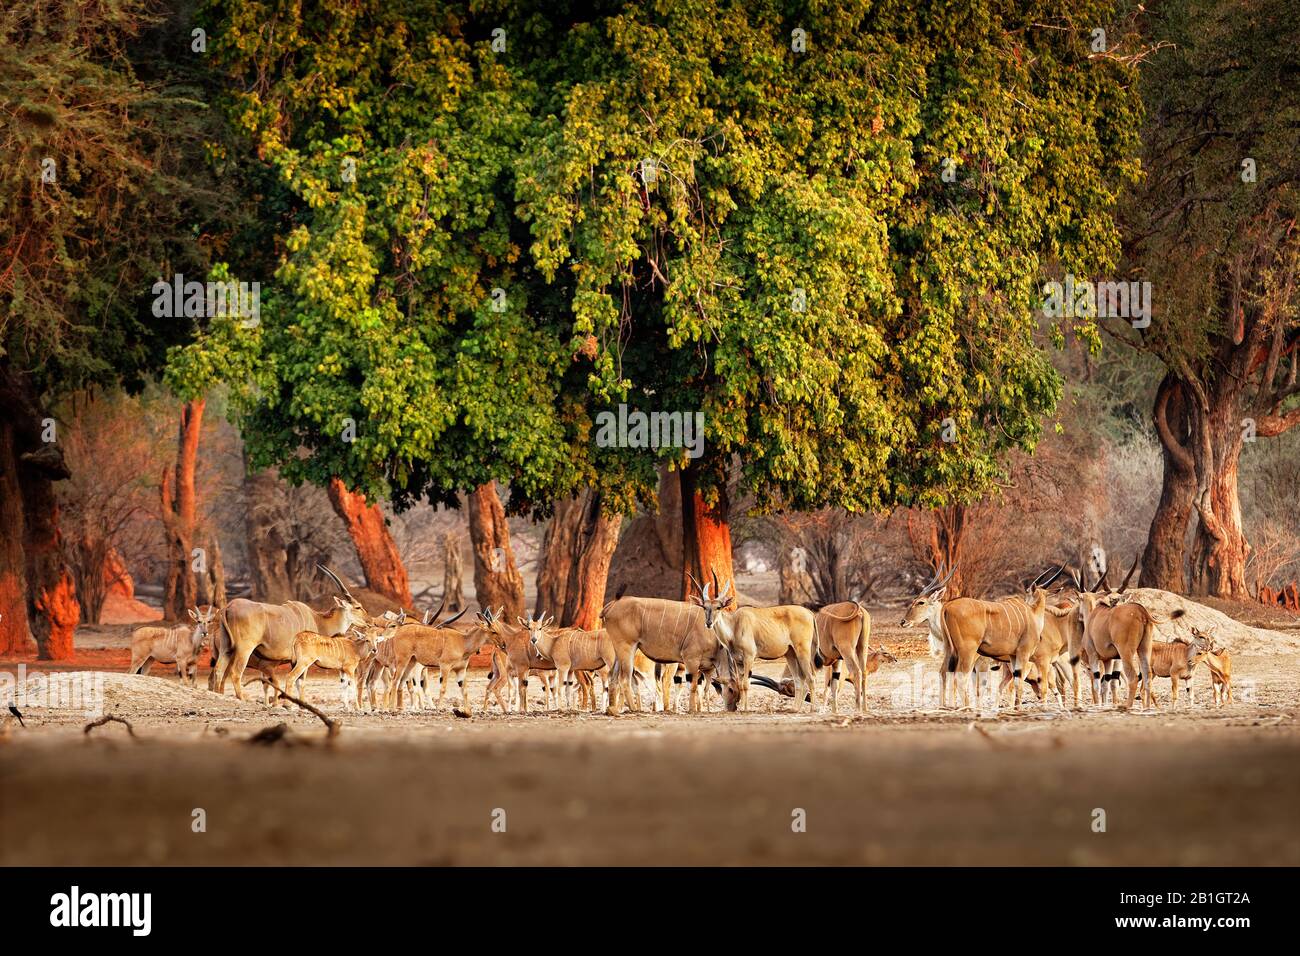 Herd of Common Eland - Taurotragus oryx also the southern eland or eland antelope, savannah and plains antelope found in East and Southern Africa, fam Stock Photo